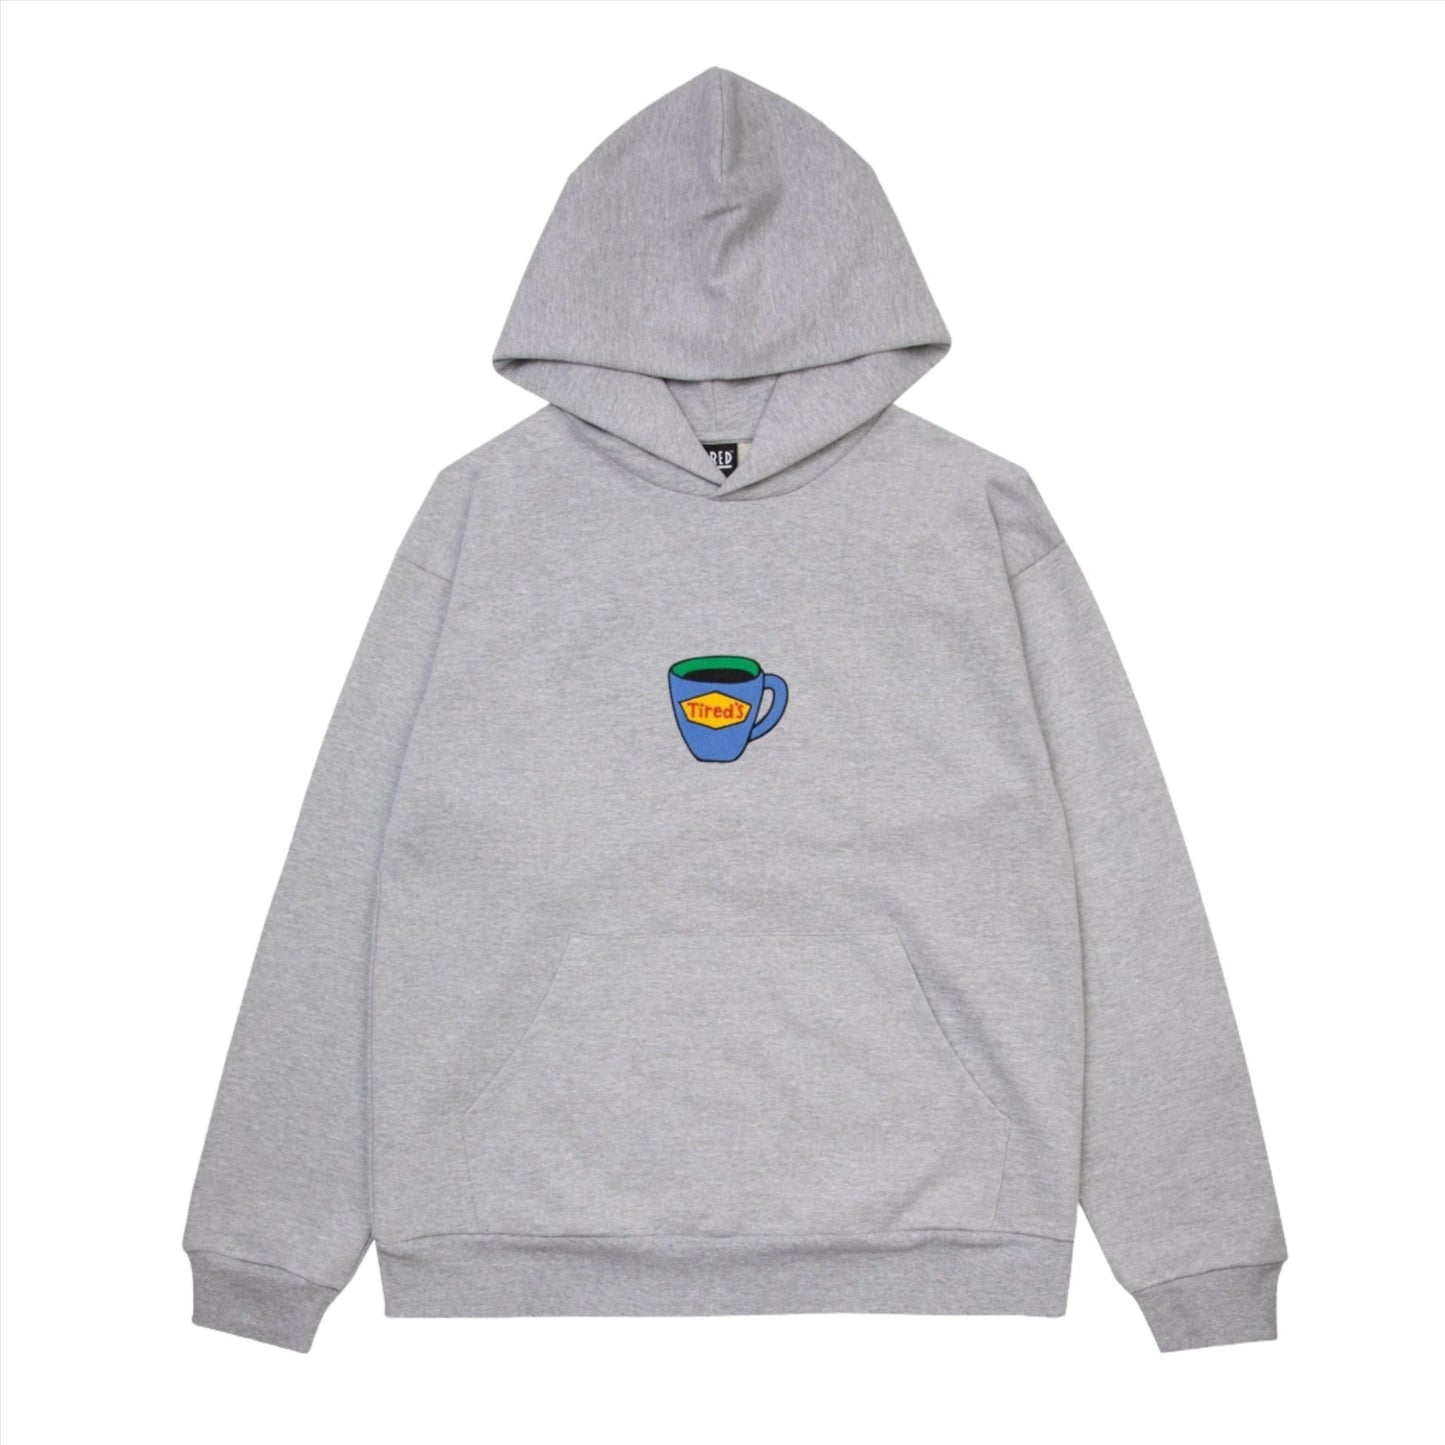 Tired Skateboards Tired's Hoodie Heather Grey